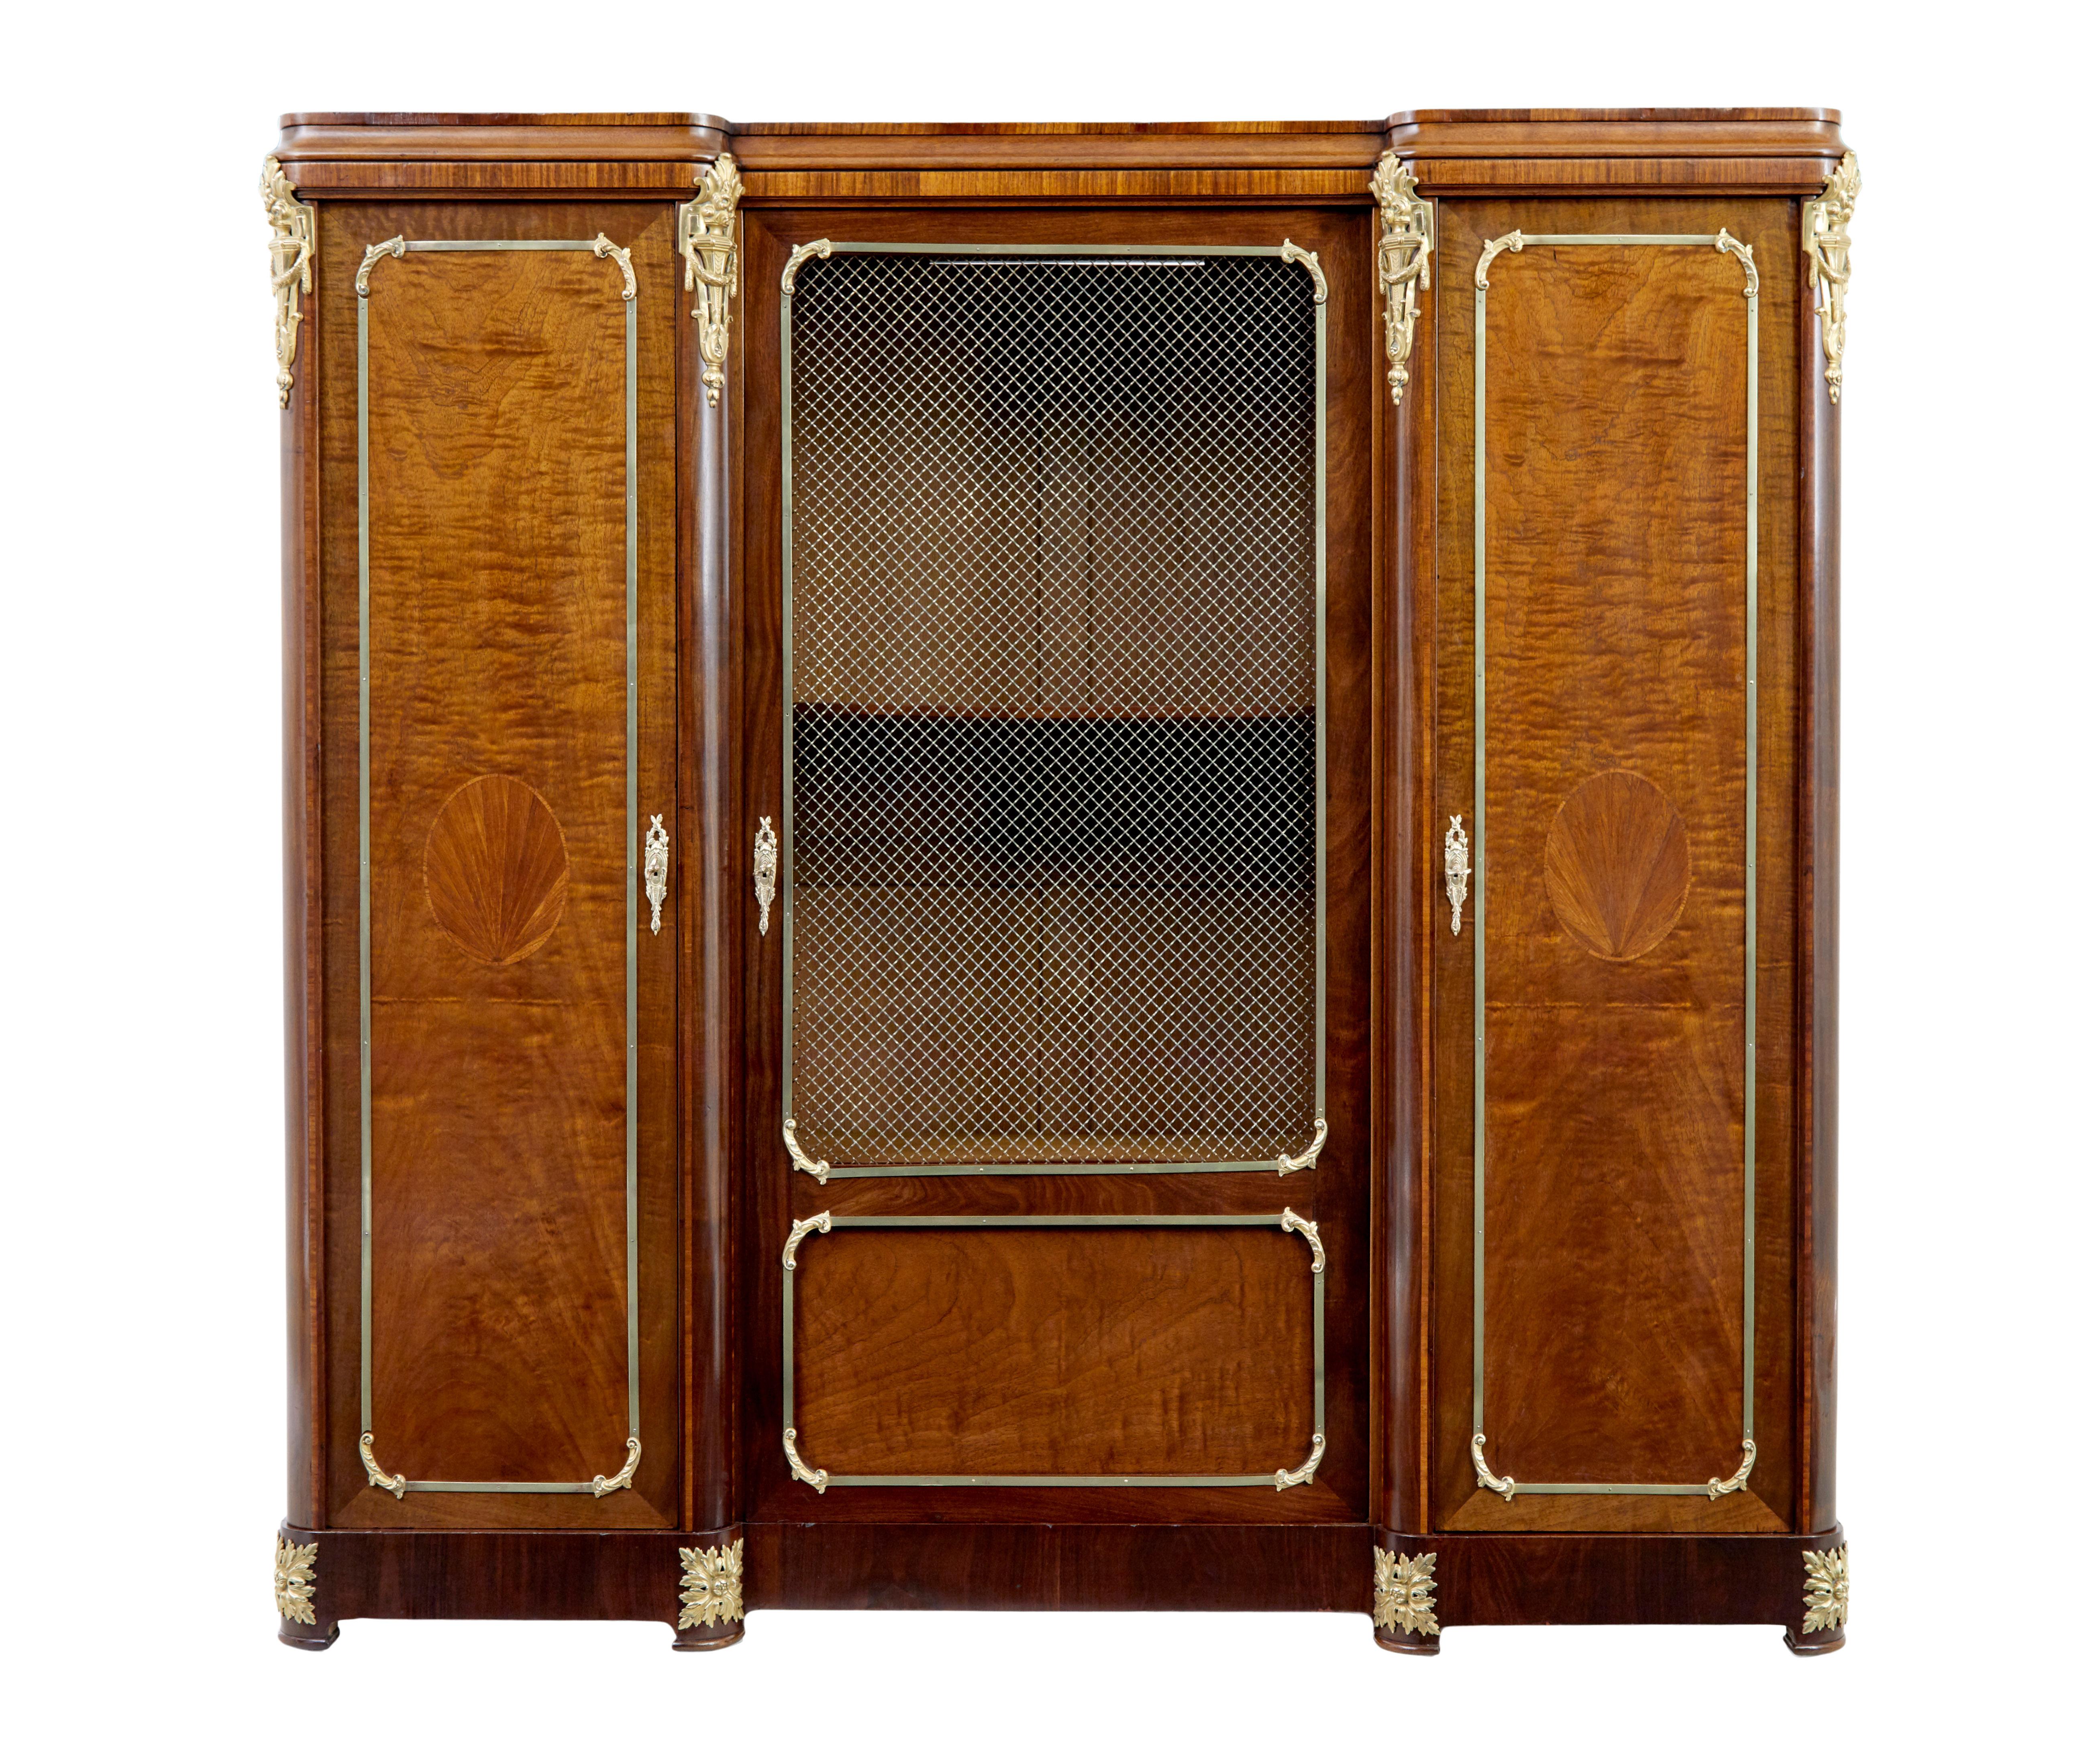 19th century French empire influenced mahogany cabinet circa 1890.

This cupboard was constructed using a flat pack technique, with panels held in place by bolts.

Central door with decorative latice wire design, flanked either side with a single